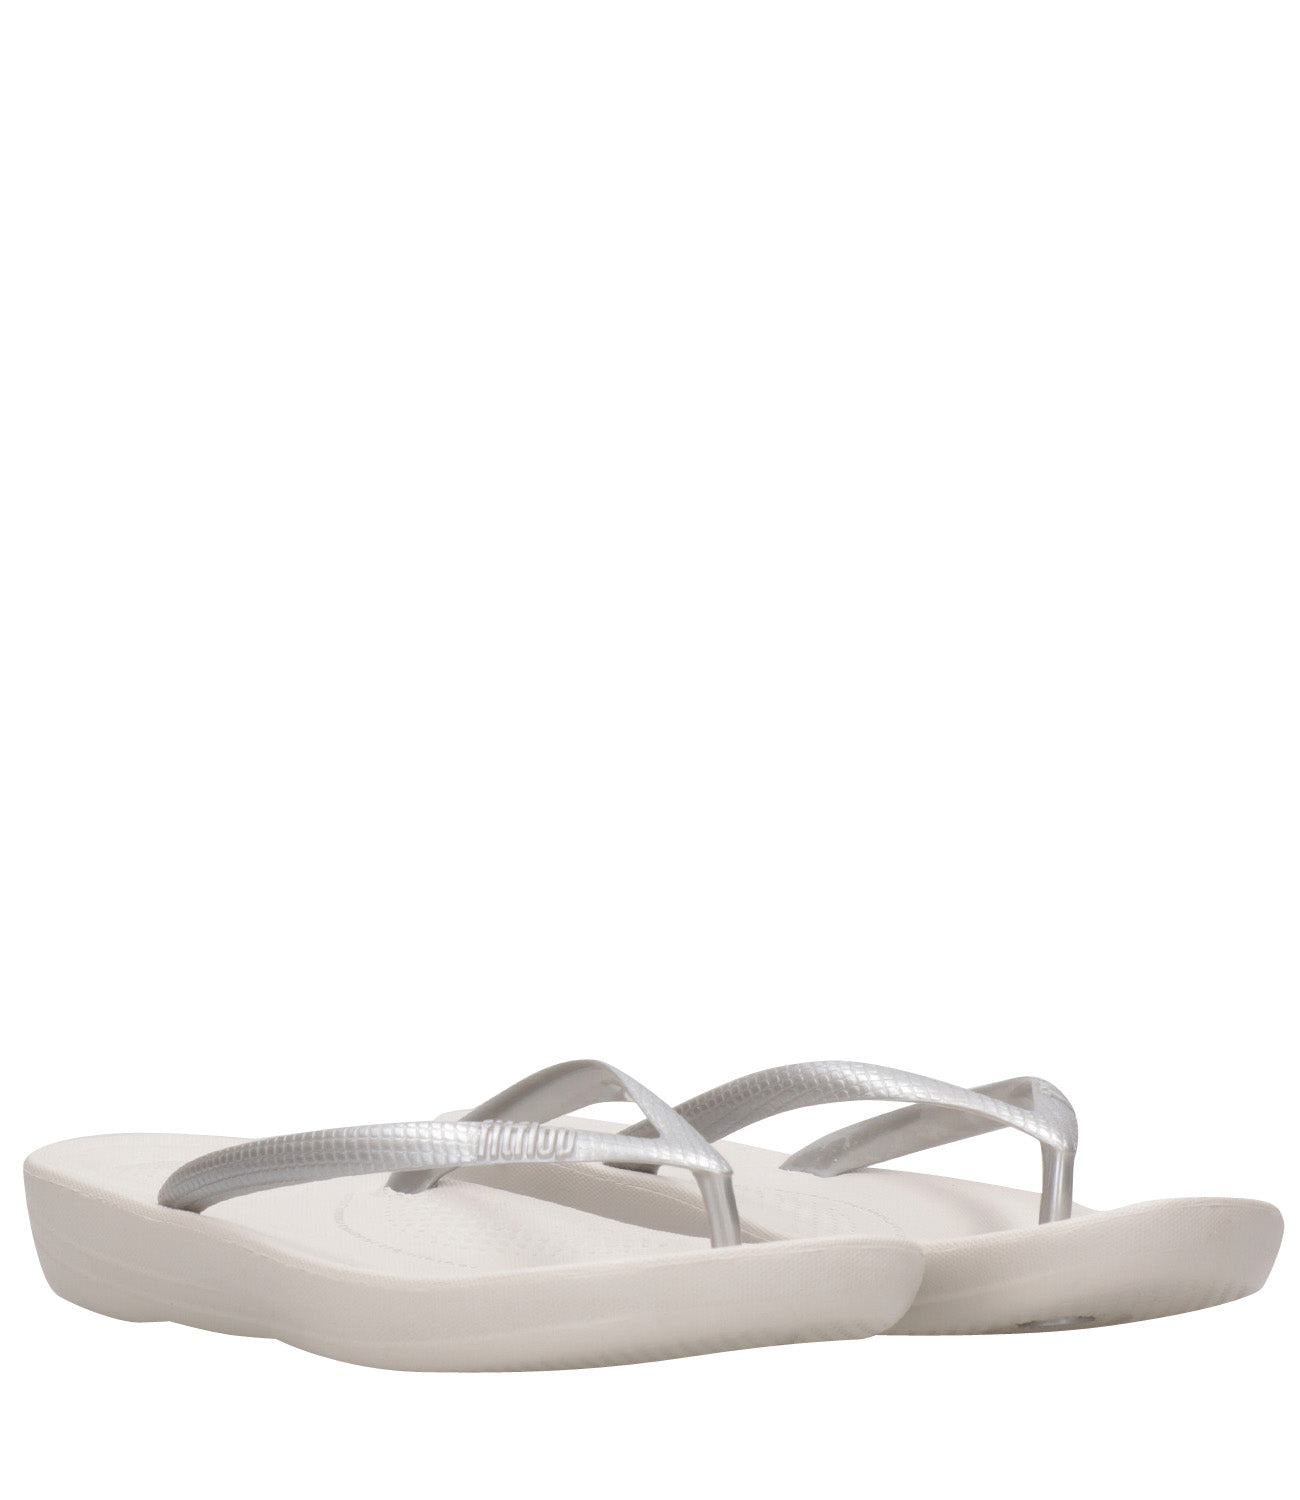 Fitflop | Infradito Inqushion Argento